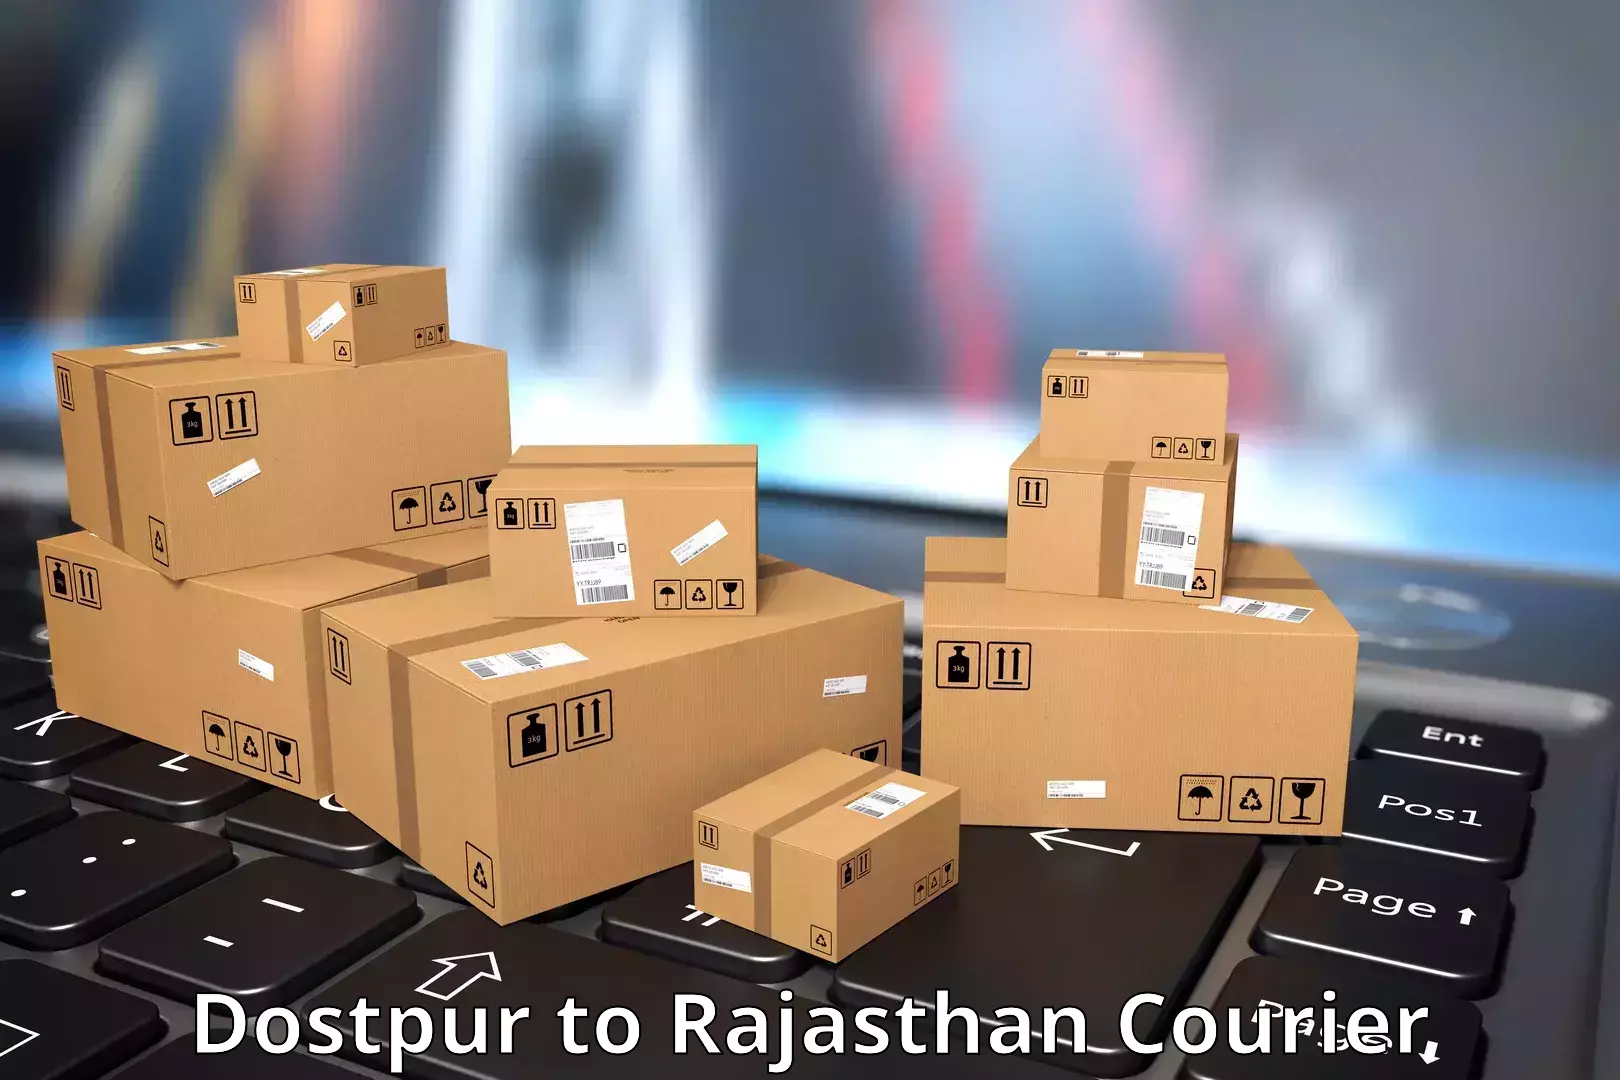 Multi-national courier services Dostpur to Sanchore